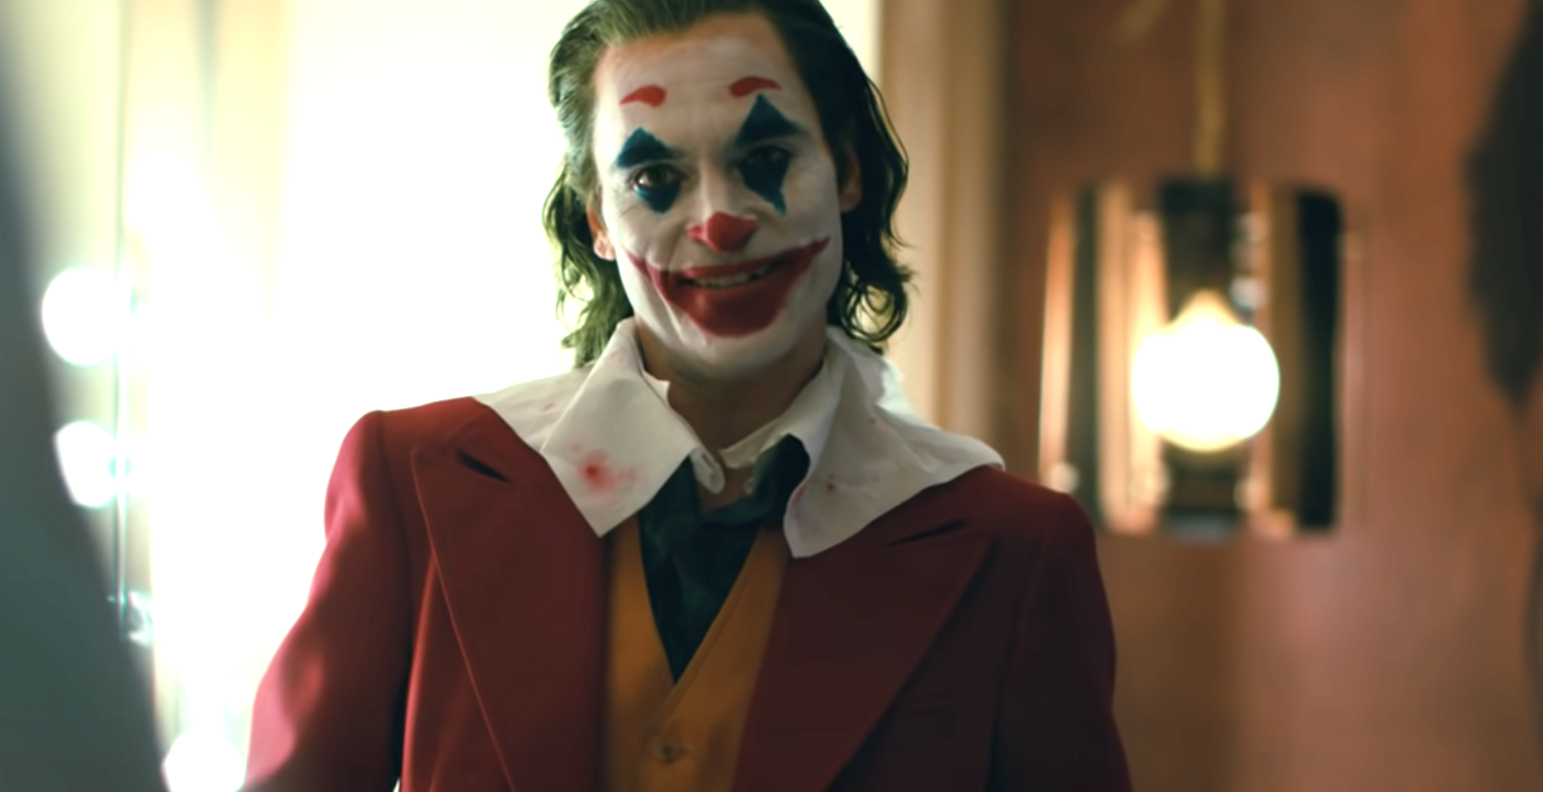 Best joker quotes 2019: When your time is good, your mistakes are taken as jokes